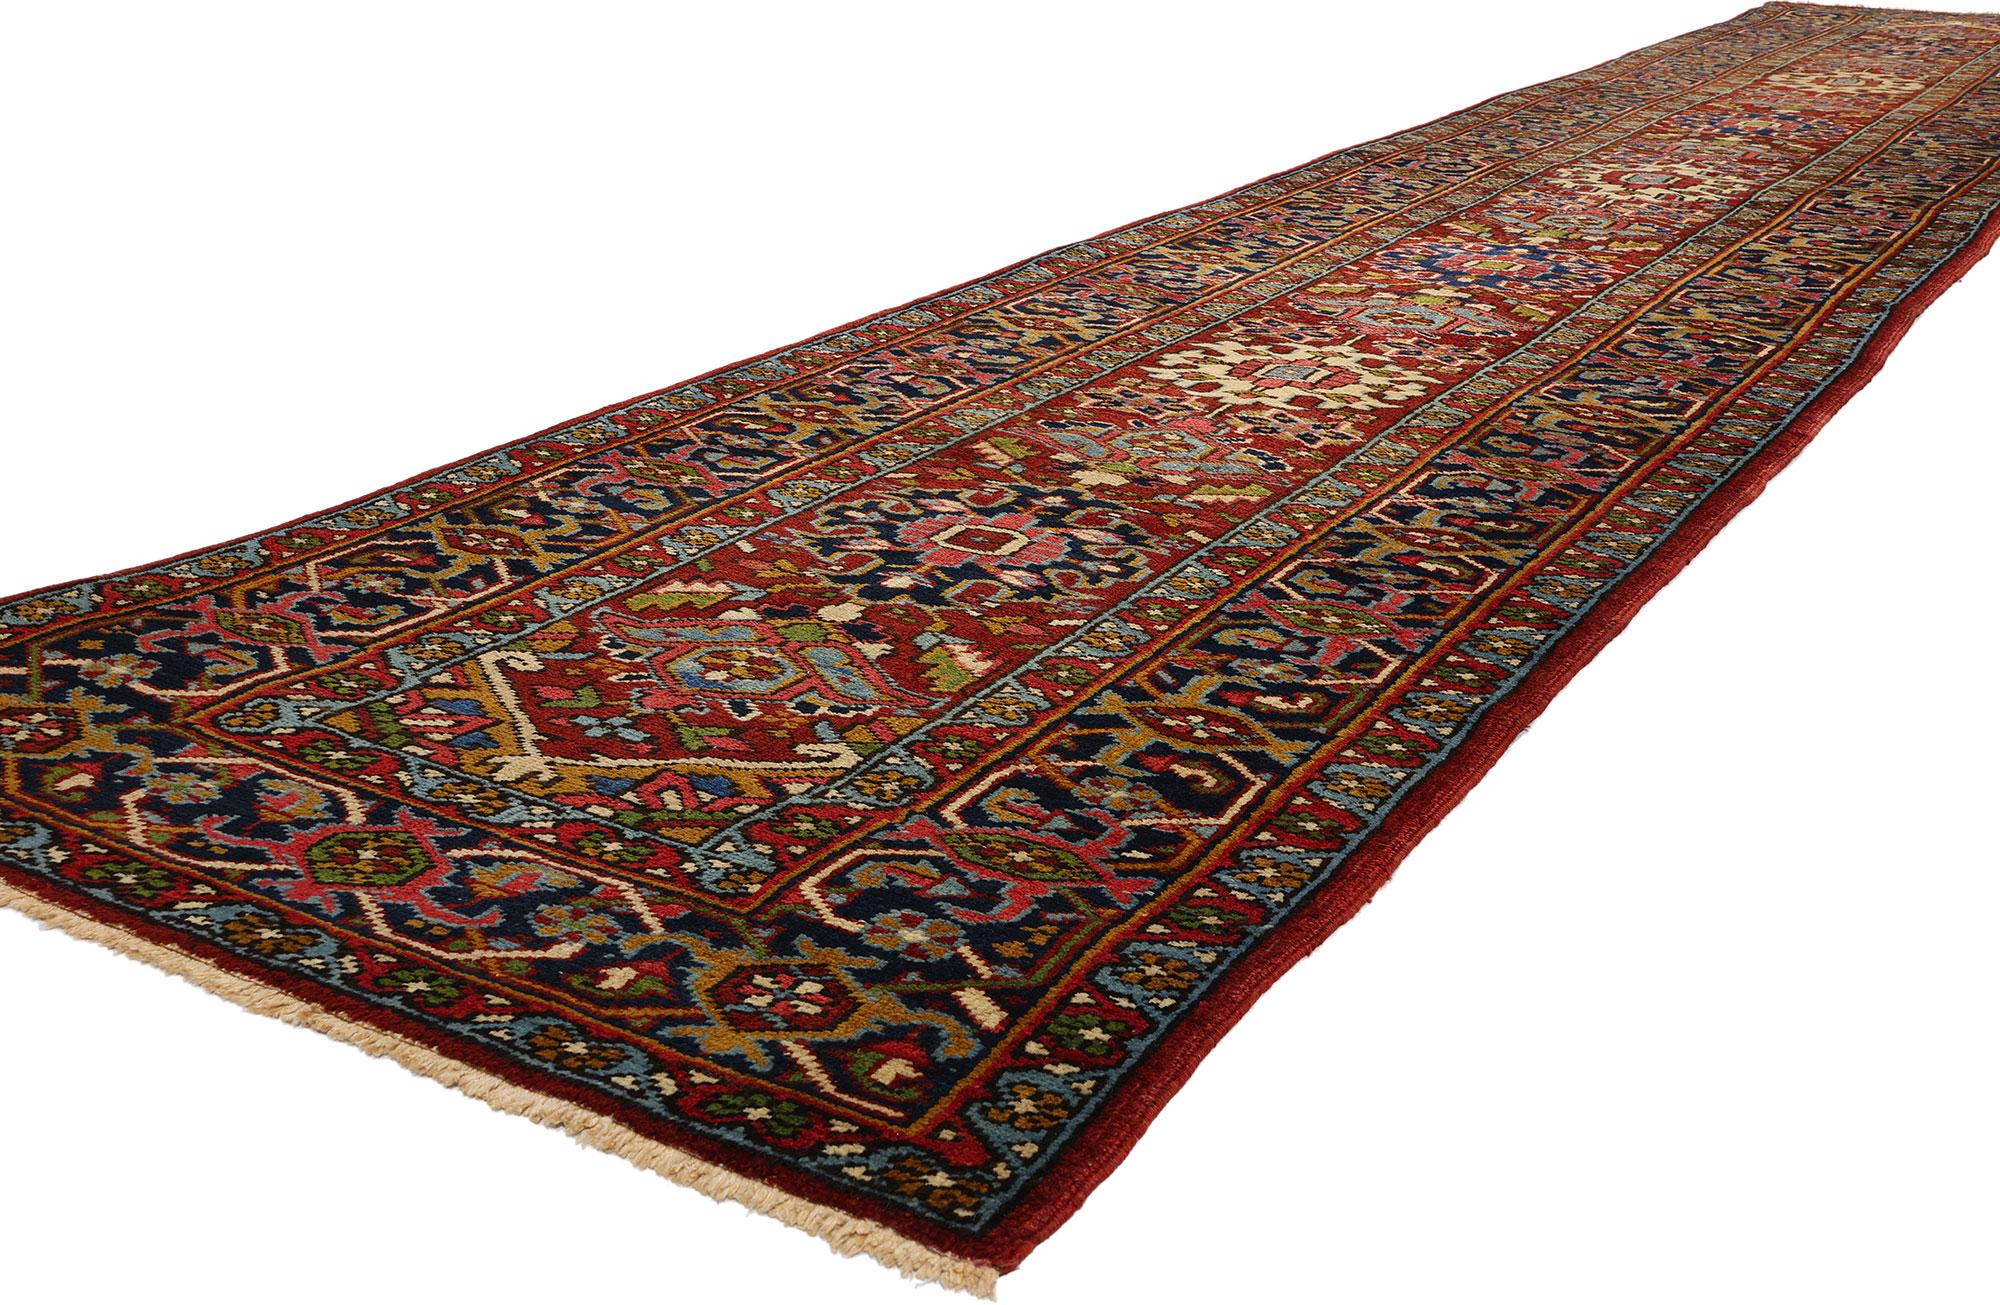 53871 Vintage Persian Heriz Rug Runner, 03'03 x 17'08. Explore the captivating appeal of Heriz rugs, originating from the northwestern region of Iran, celebrated for their unparalleled attributes. Painstakingly crafted in the village of Heris,